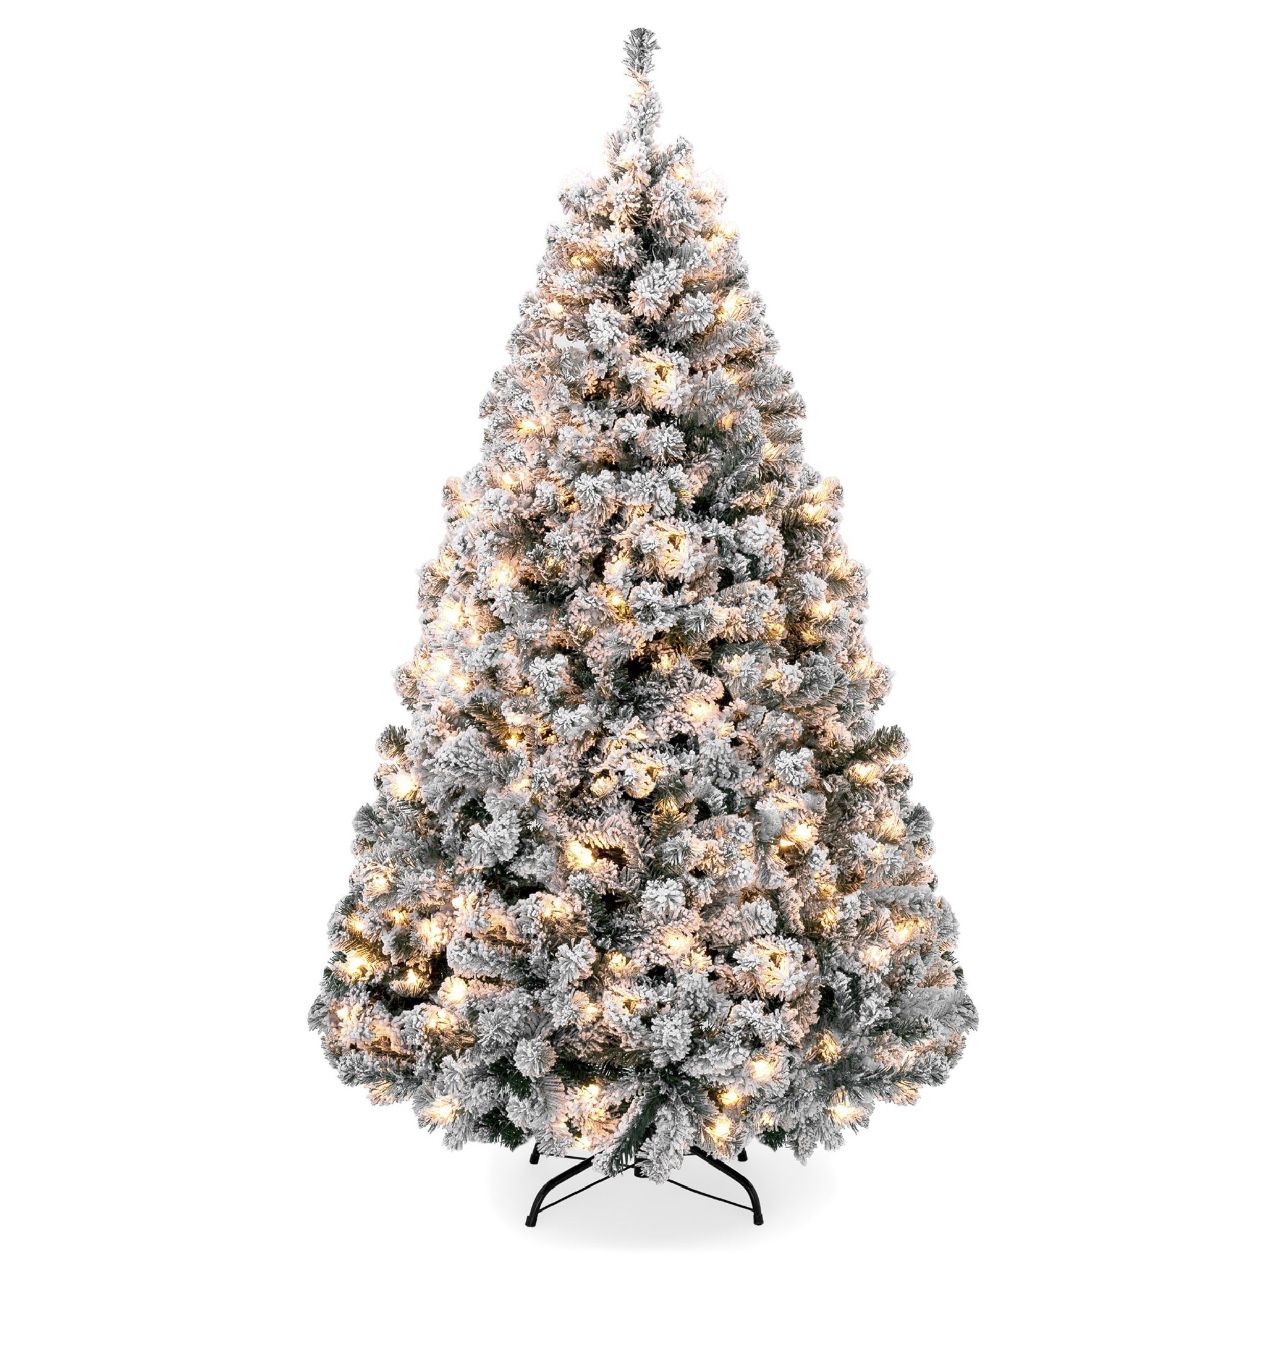 6ft Pre-lit Holiday Christmas Pine Tree w/ Snow Flocked Branches, 250 Warm White Lights, bought it for $225  